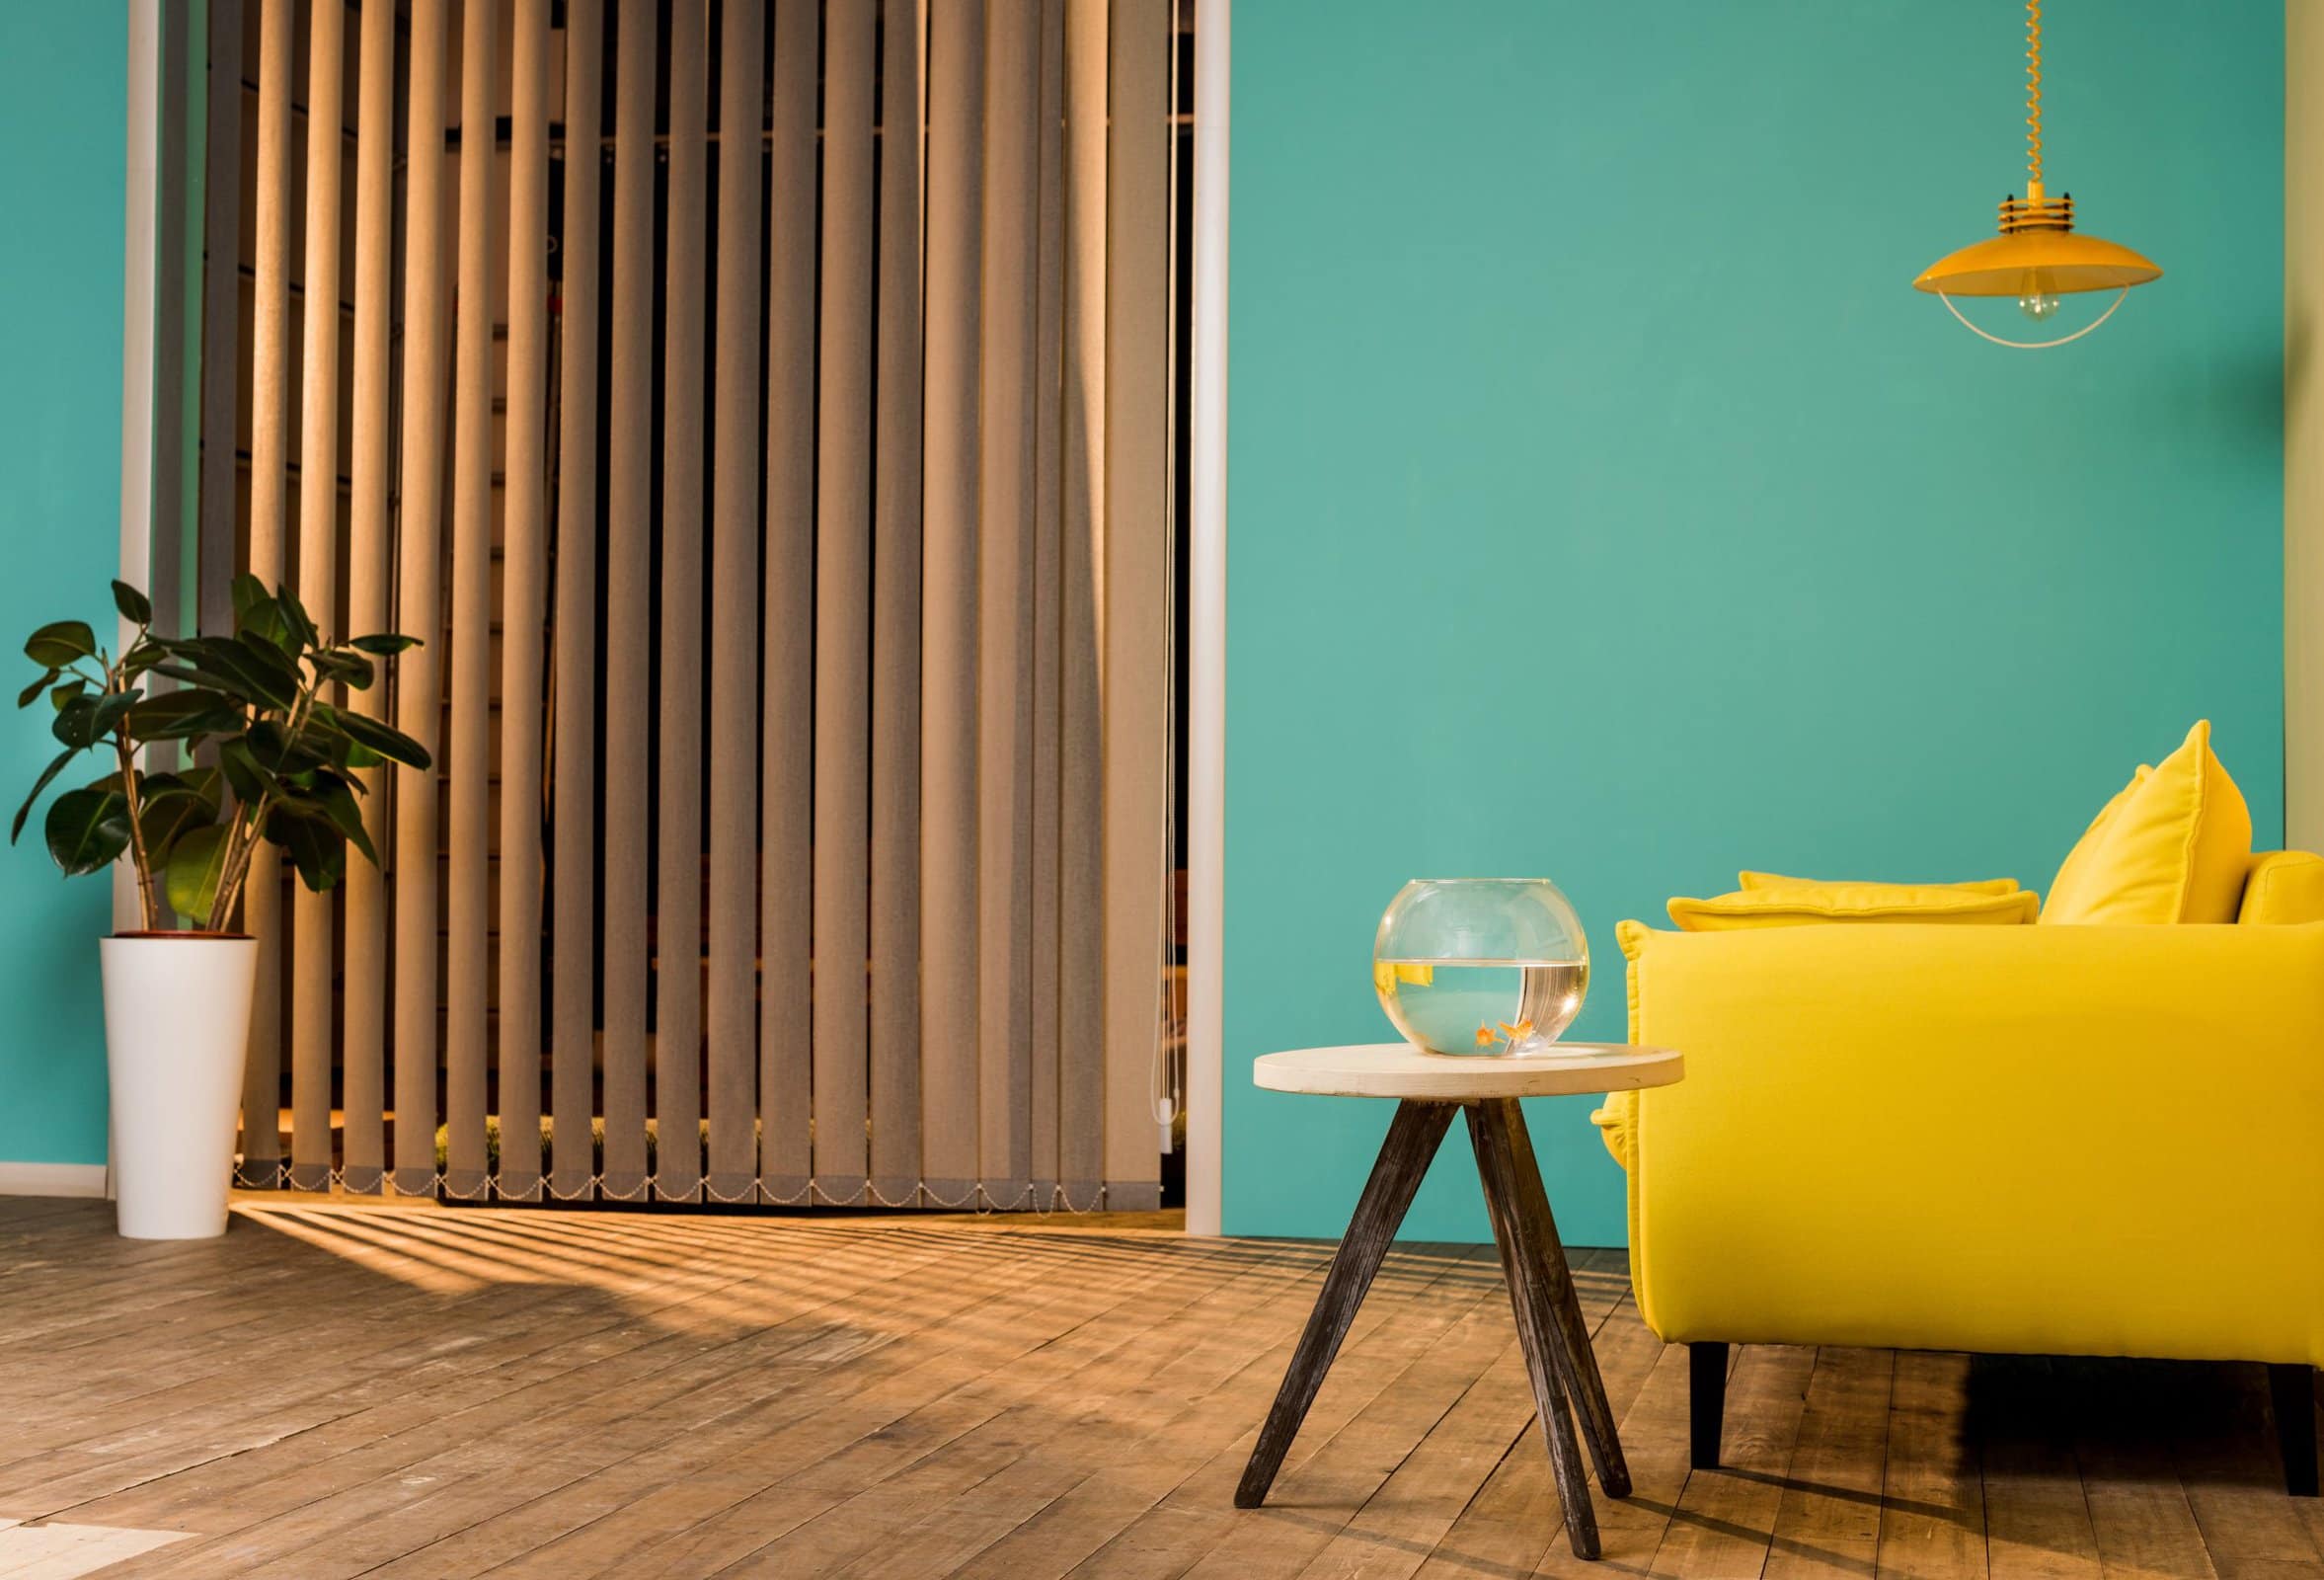  Turquoise and Yellow Are a Match Made in Heaven scaled